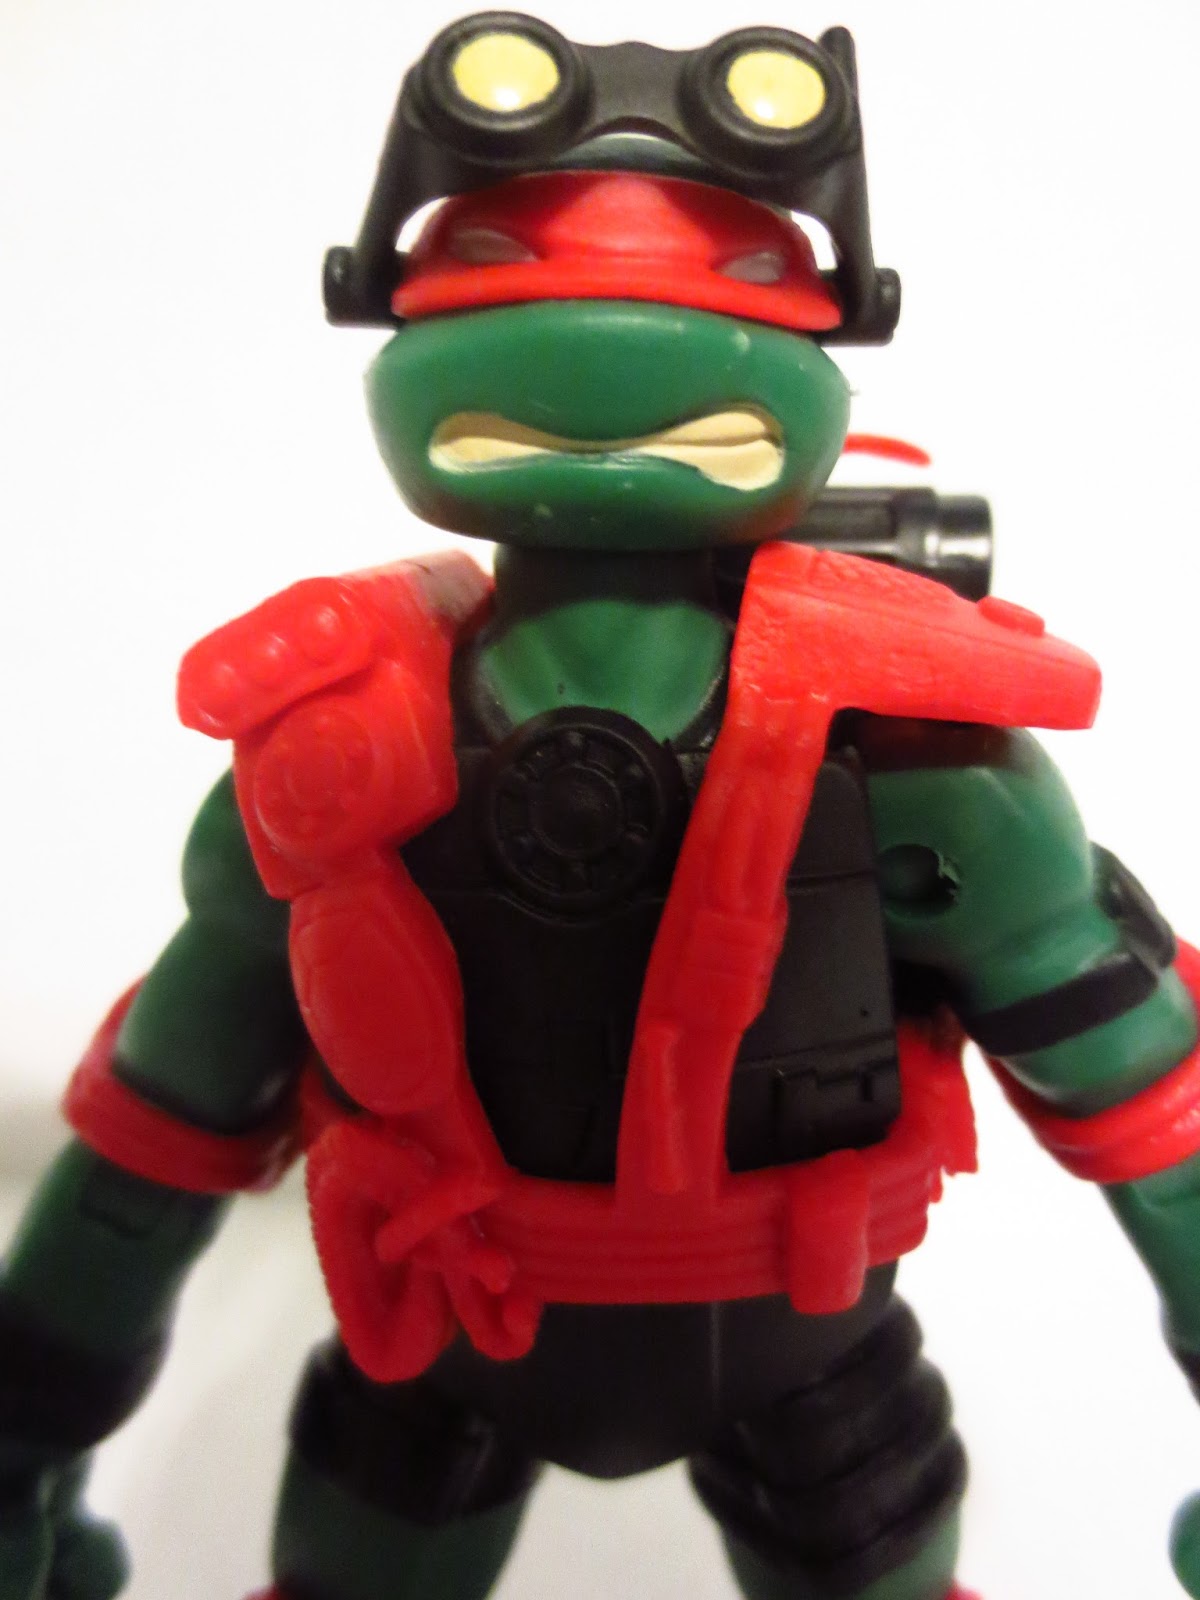 Action Figure Review: Rat King from Teenage Mutant Ninja Turtles by  Playmates (Confirmed: Good)